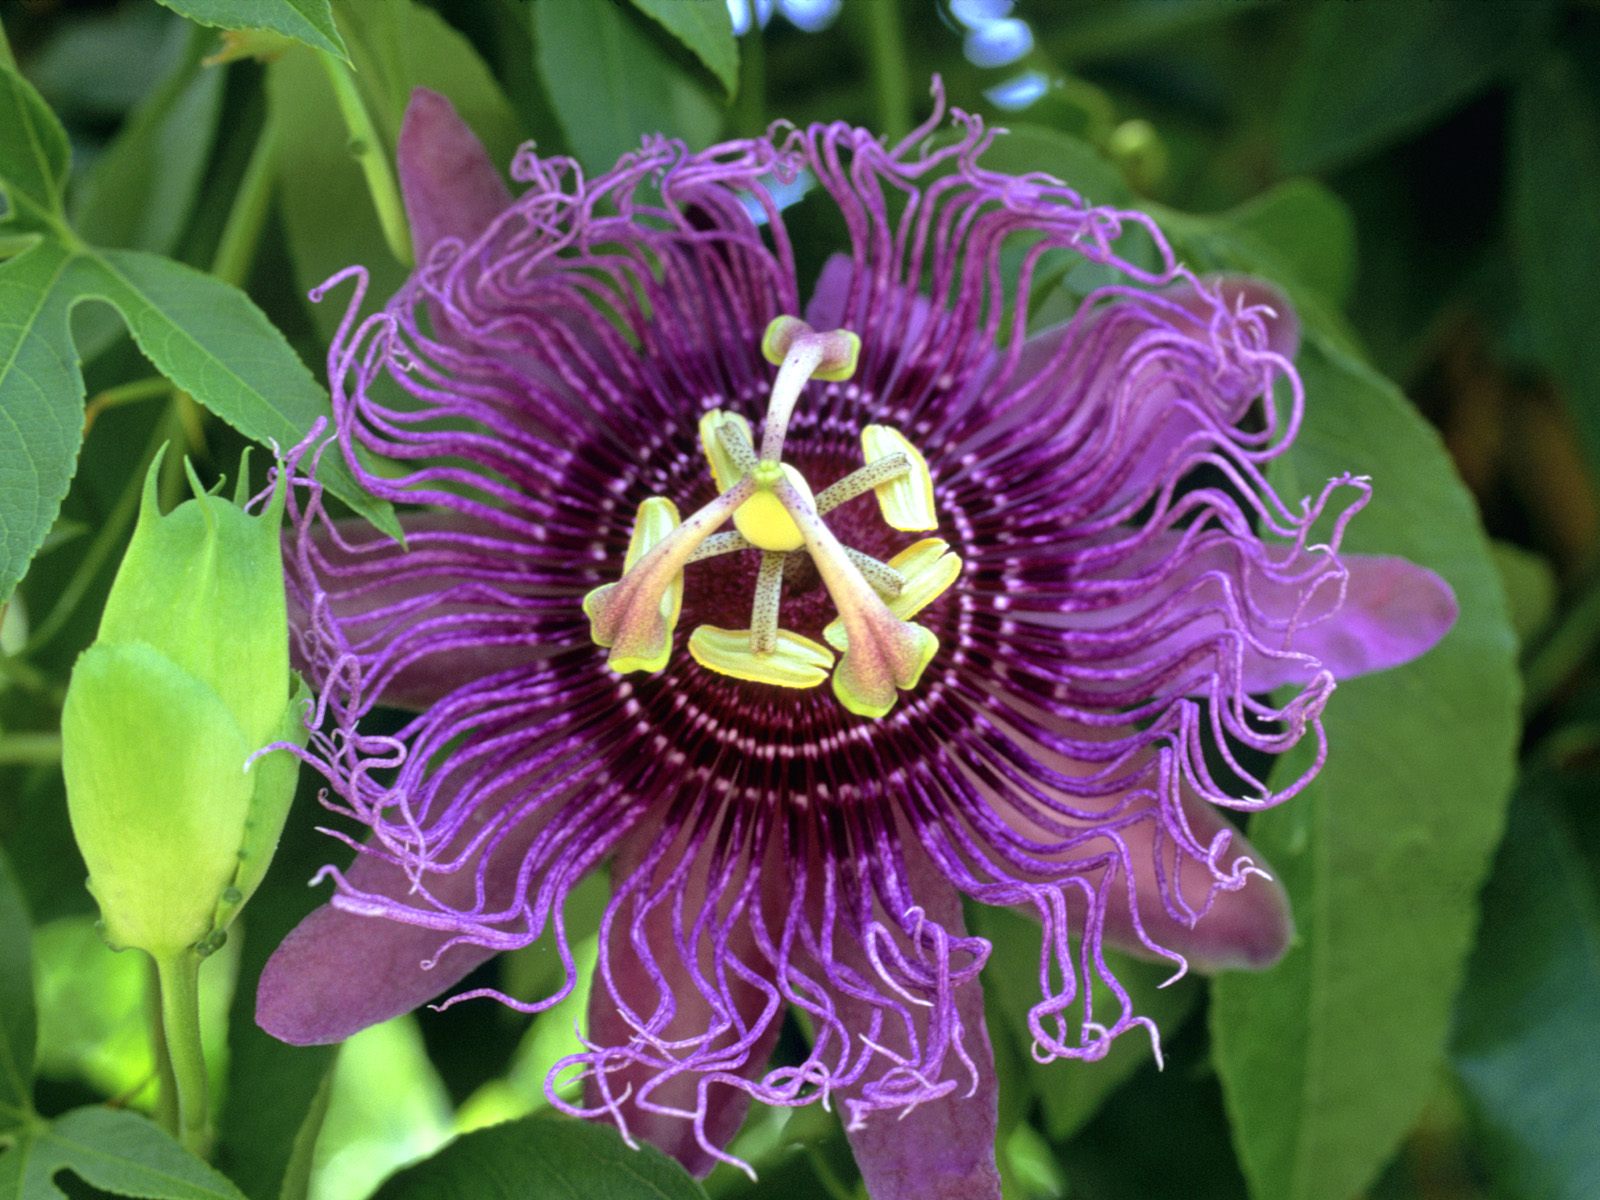 Passion flower - Hydrangea pictures - Tulips floral - HD1600x1200 ...